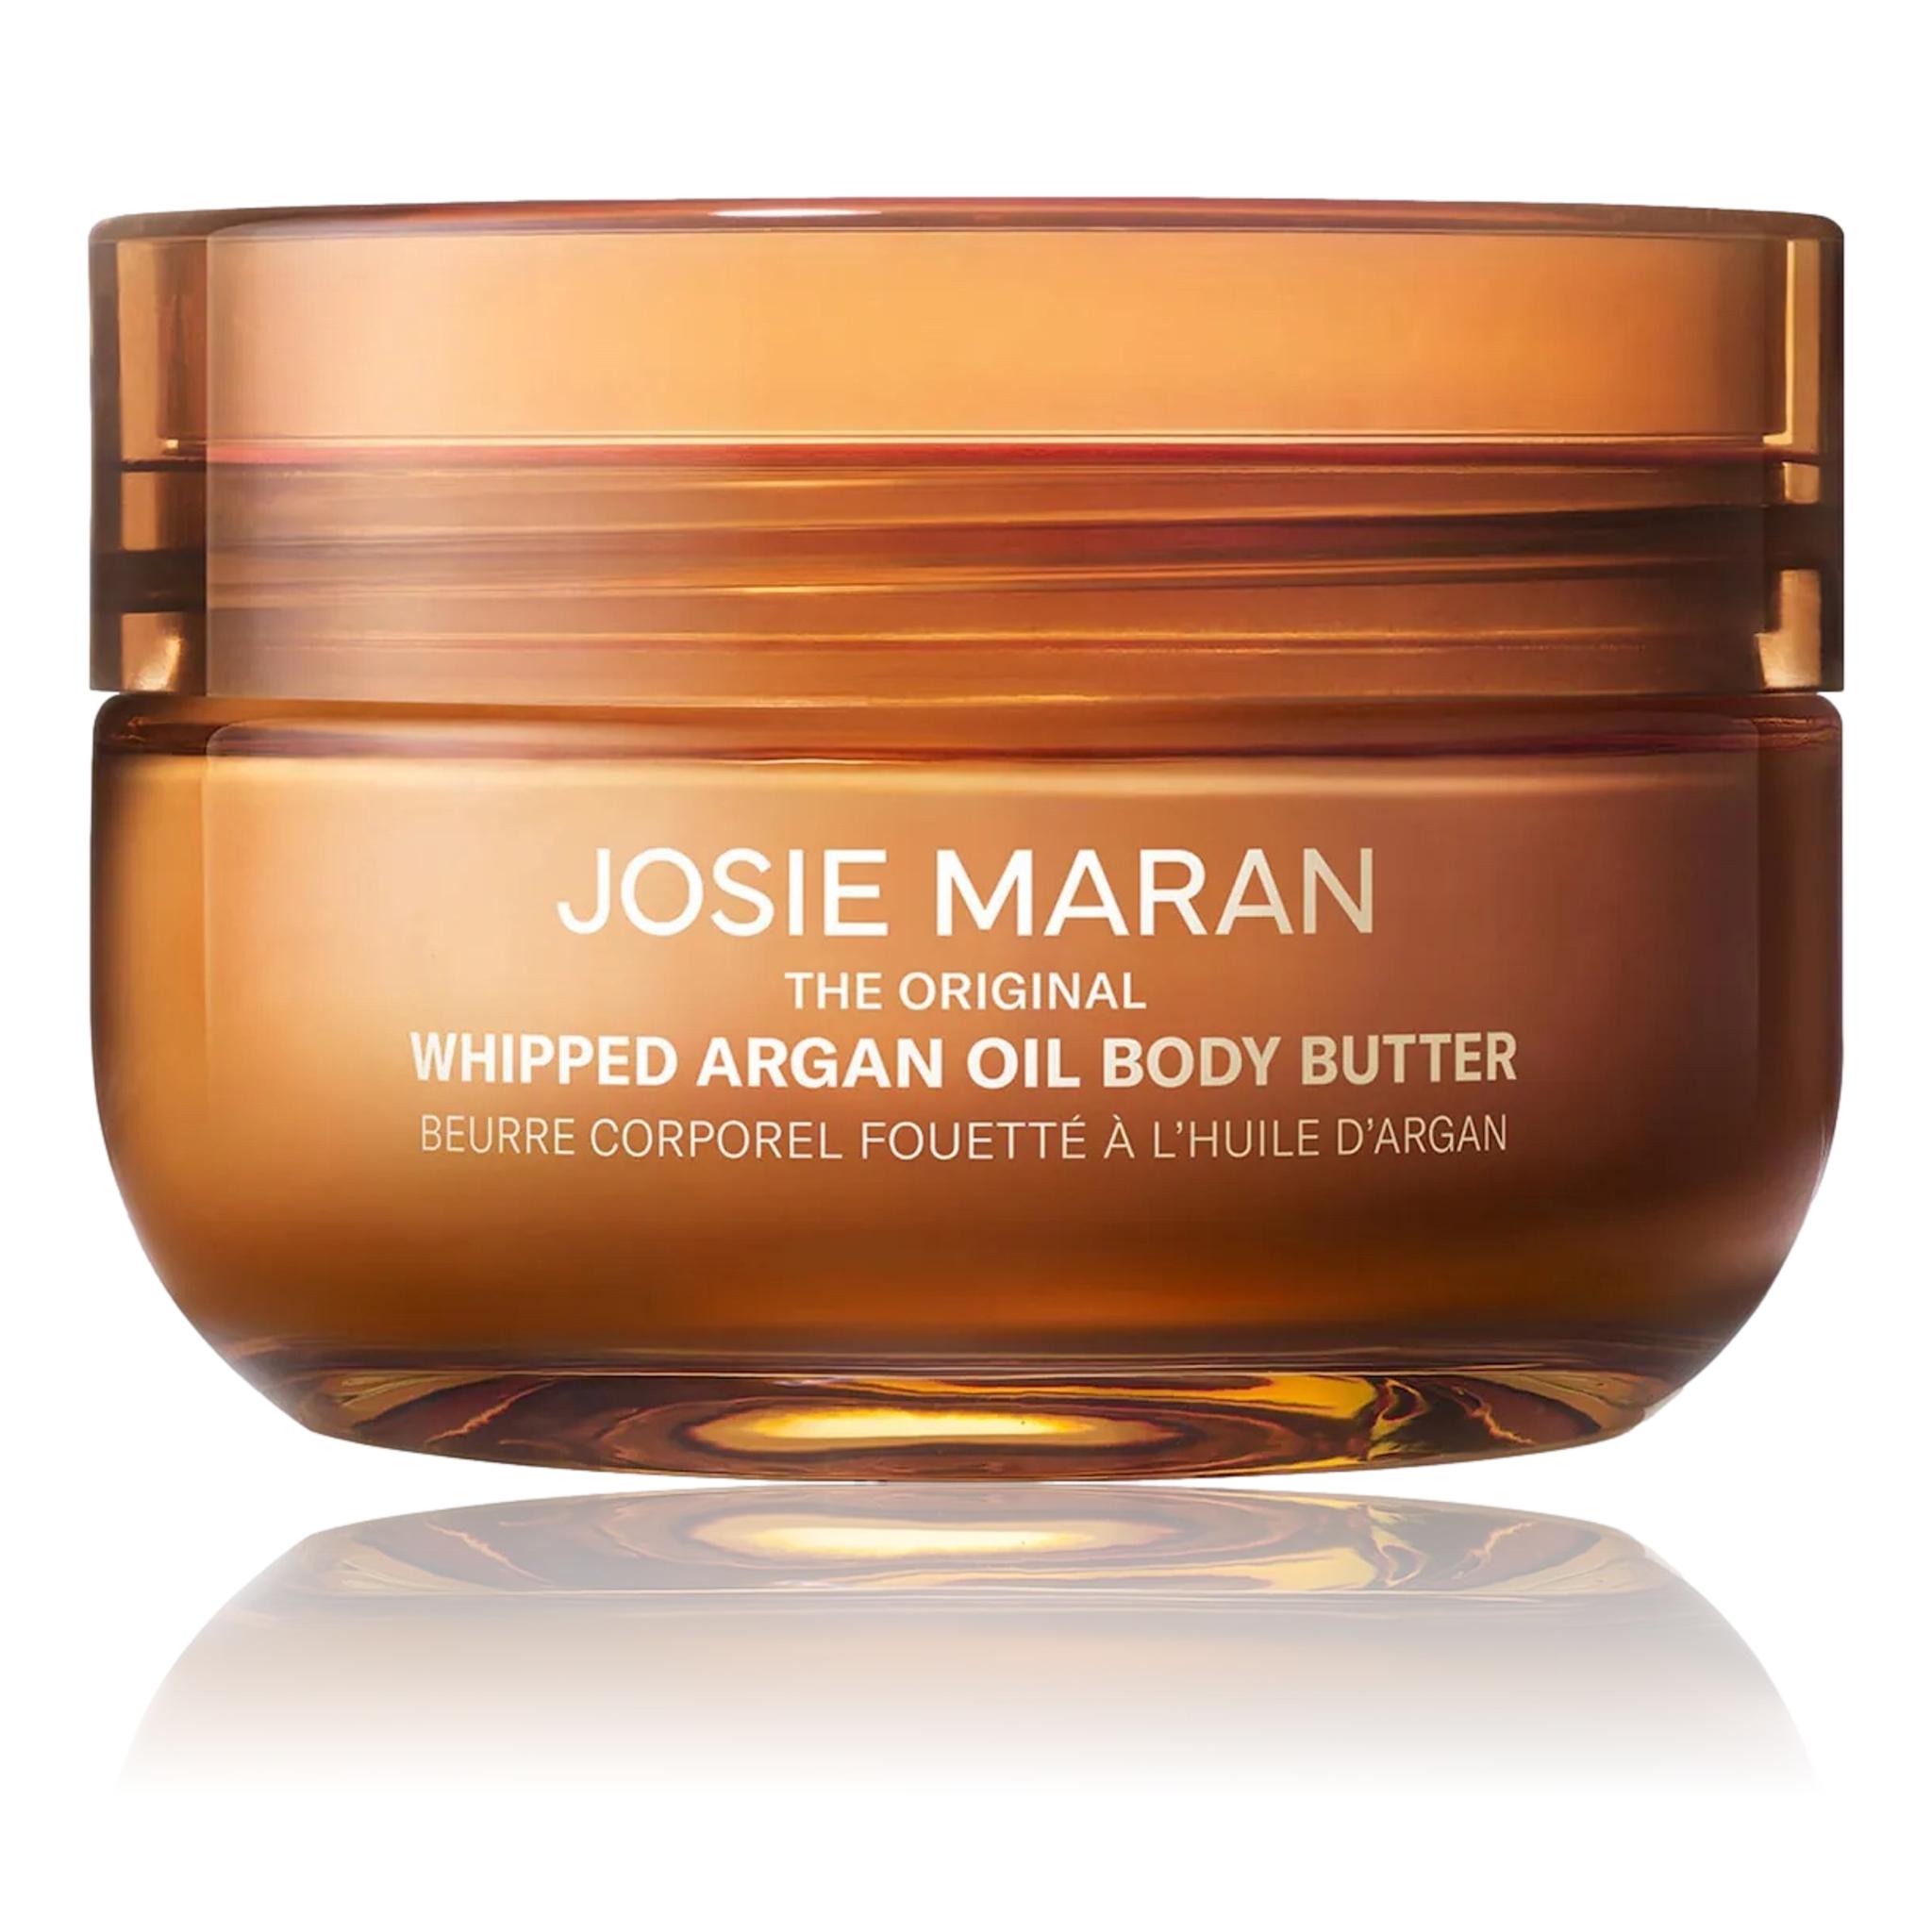 Josie Maran Always Nude (Unscented) - Whipped Argan Oil Refillable Firming Body Butter